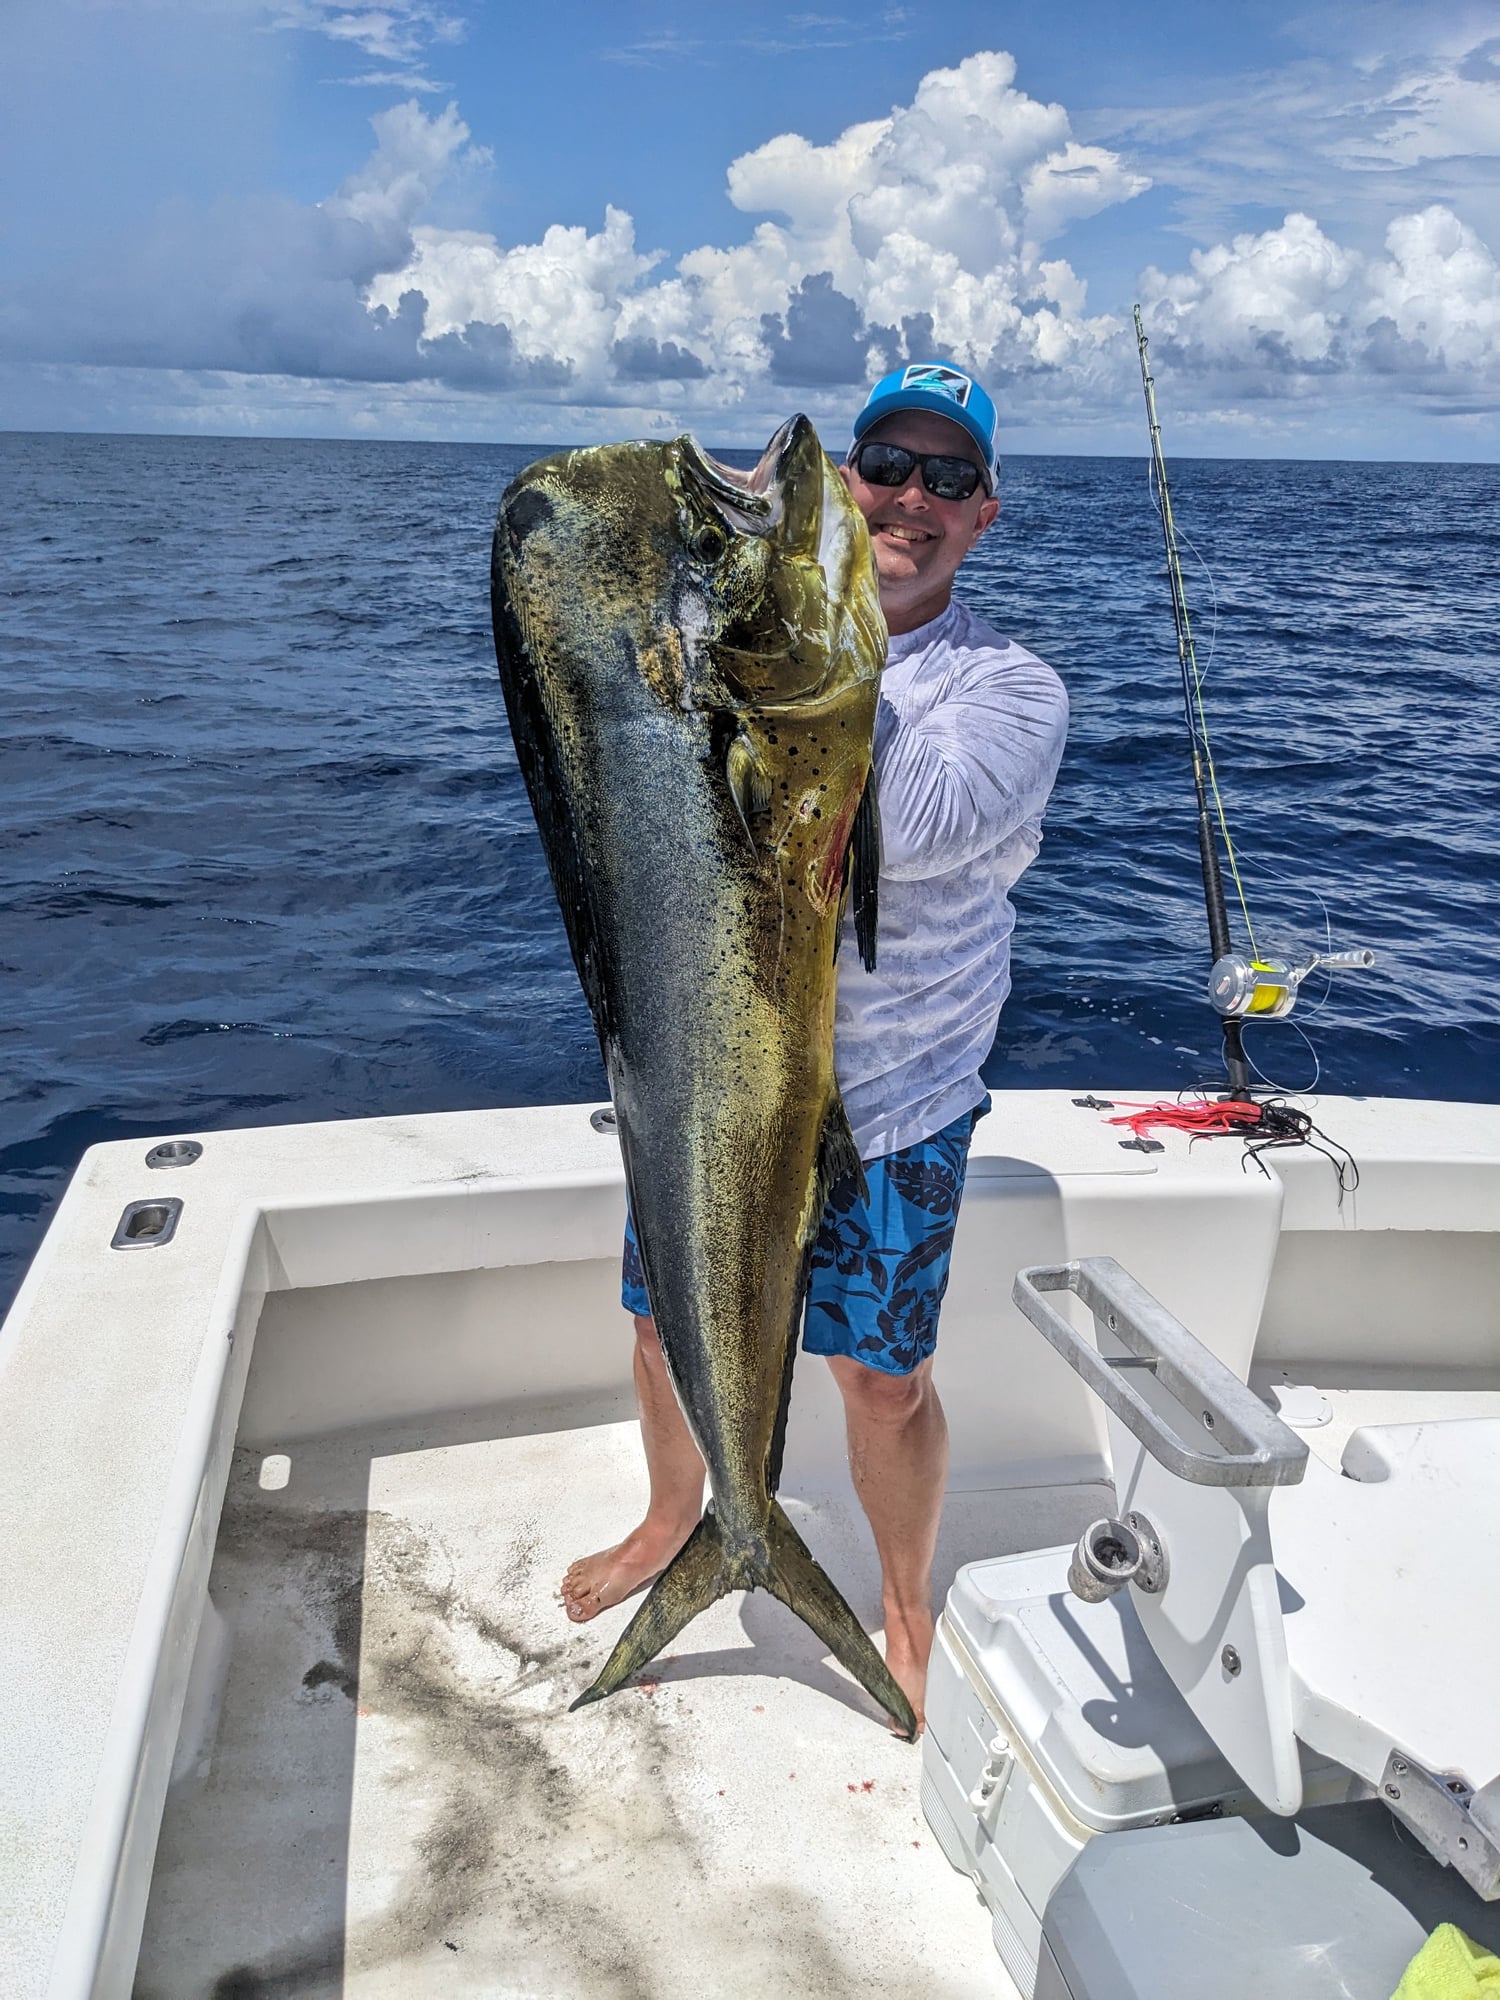 Mahi weight guesses? - Page 3 - The Hull Truth - Boating and Fishing Forum